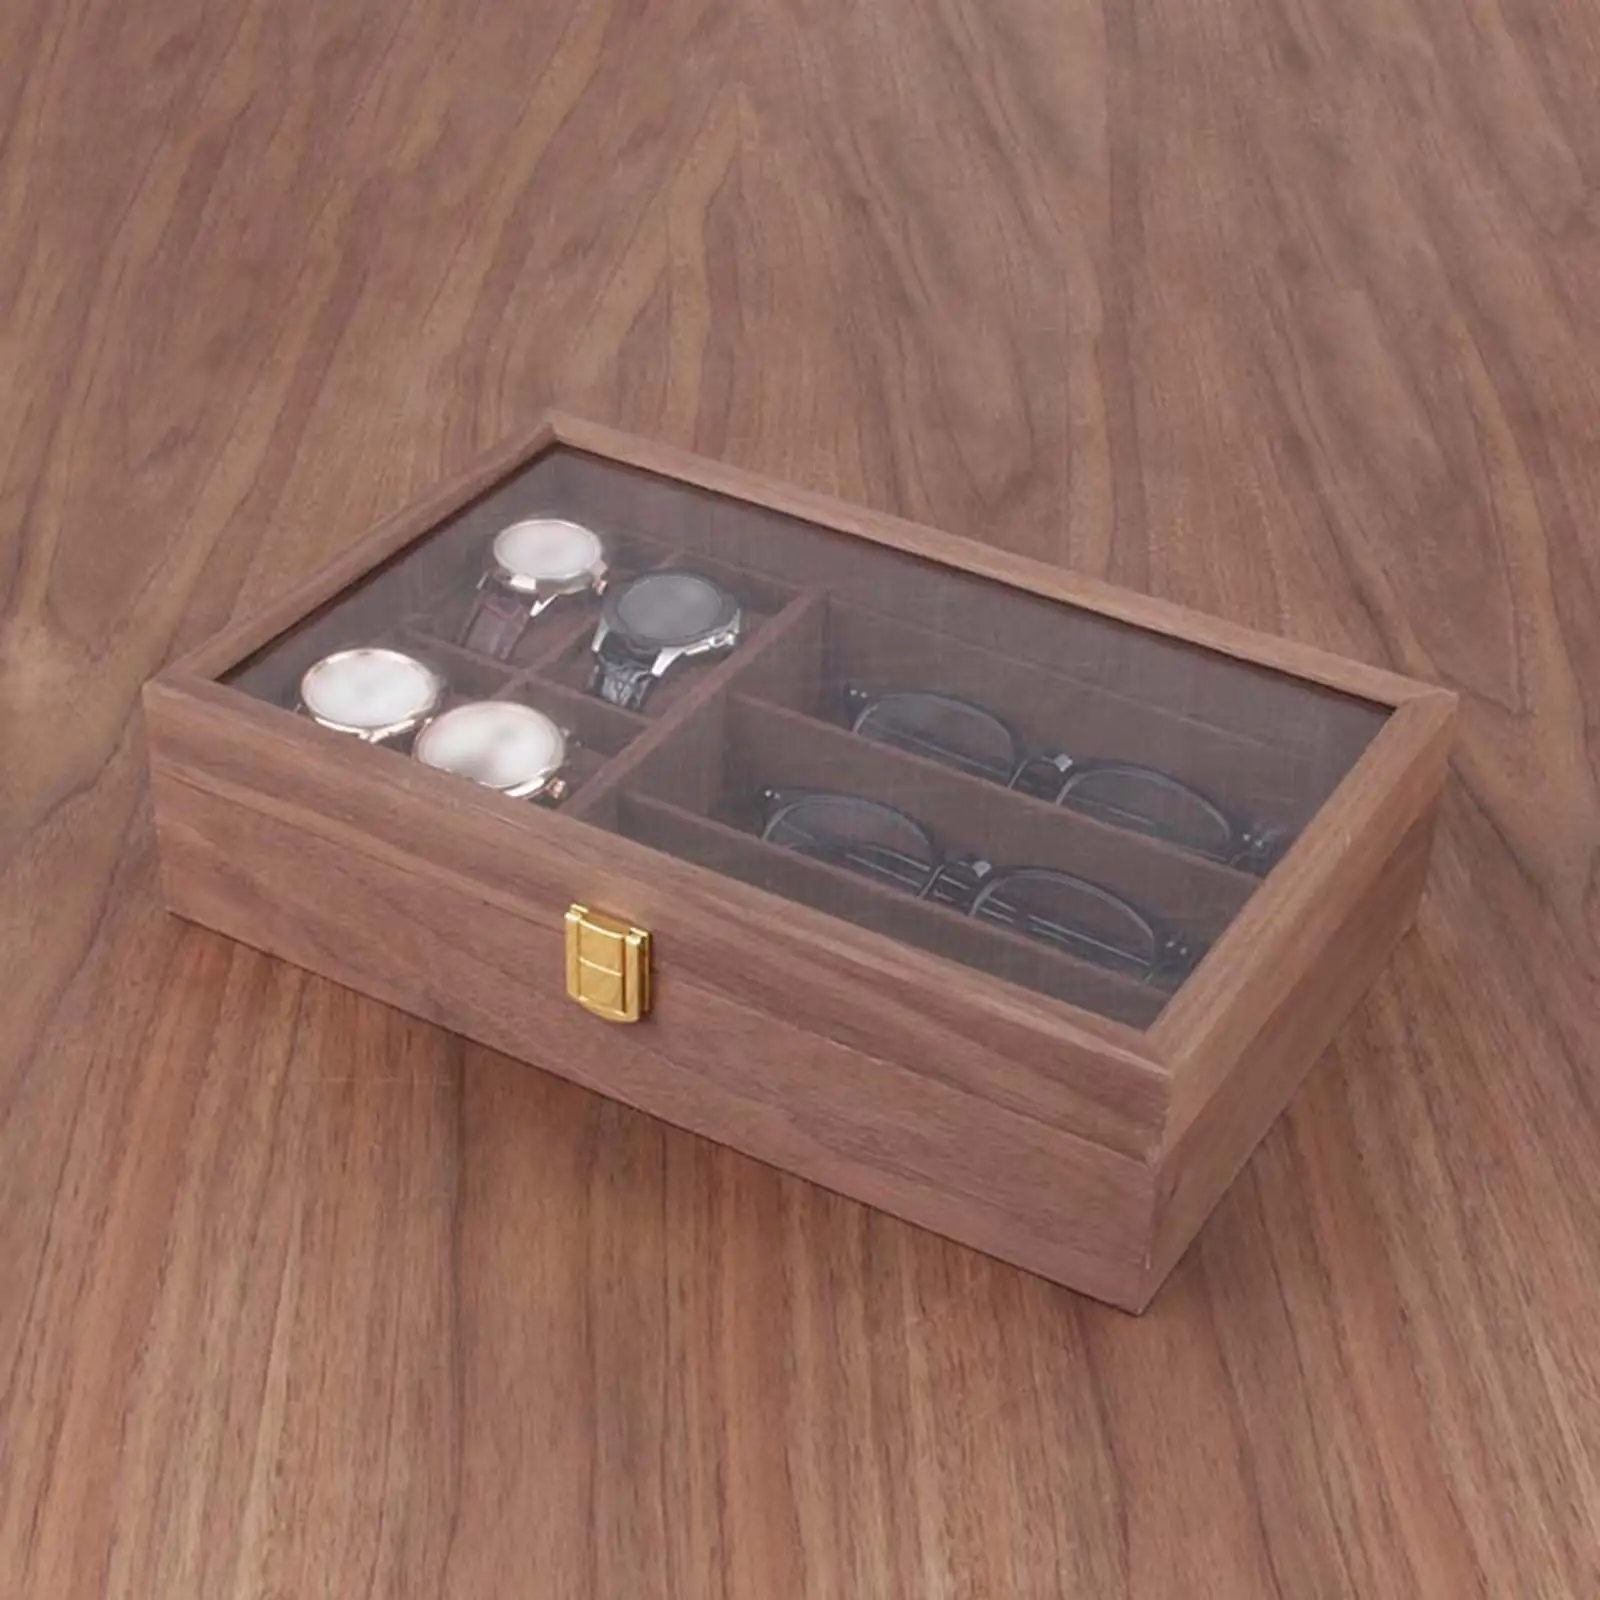 Wooden Watch Box 4 Watch Slots 3 Sunglasses Grids Portable Vintage Lockable with Clear Top Organizer Jewelry Storage Men Women